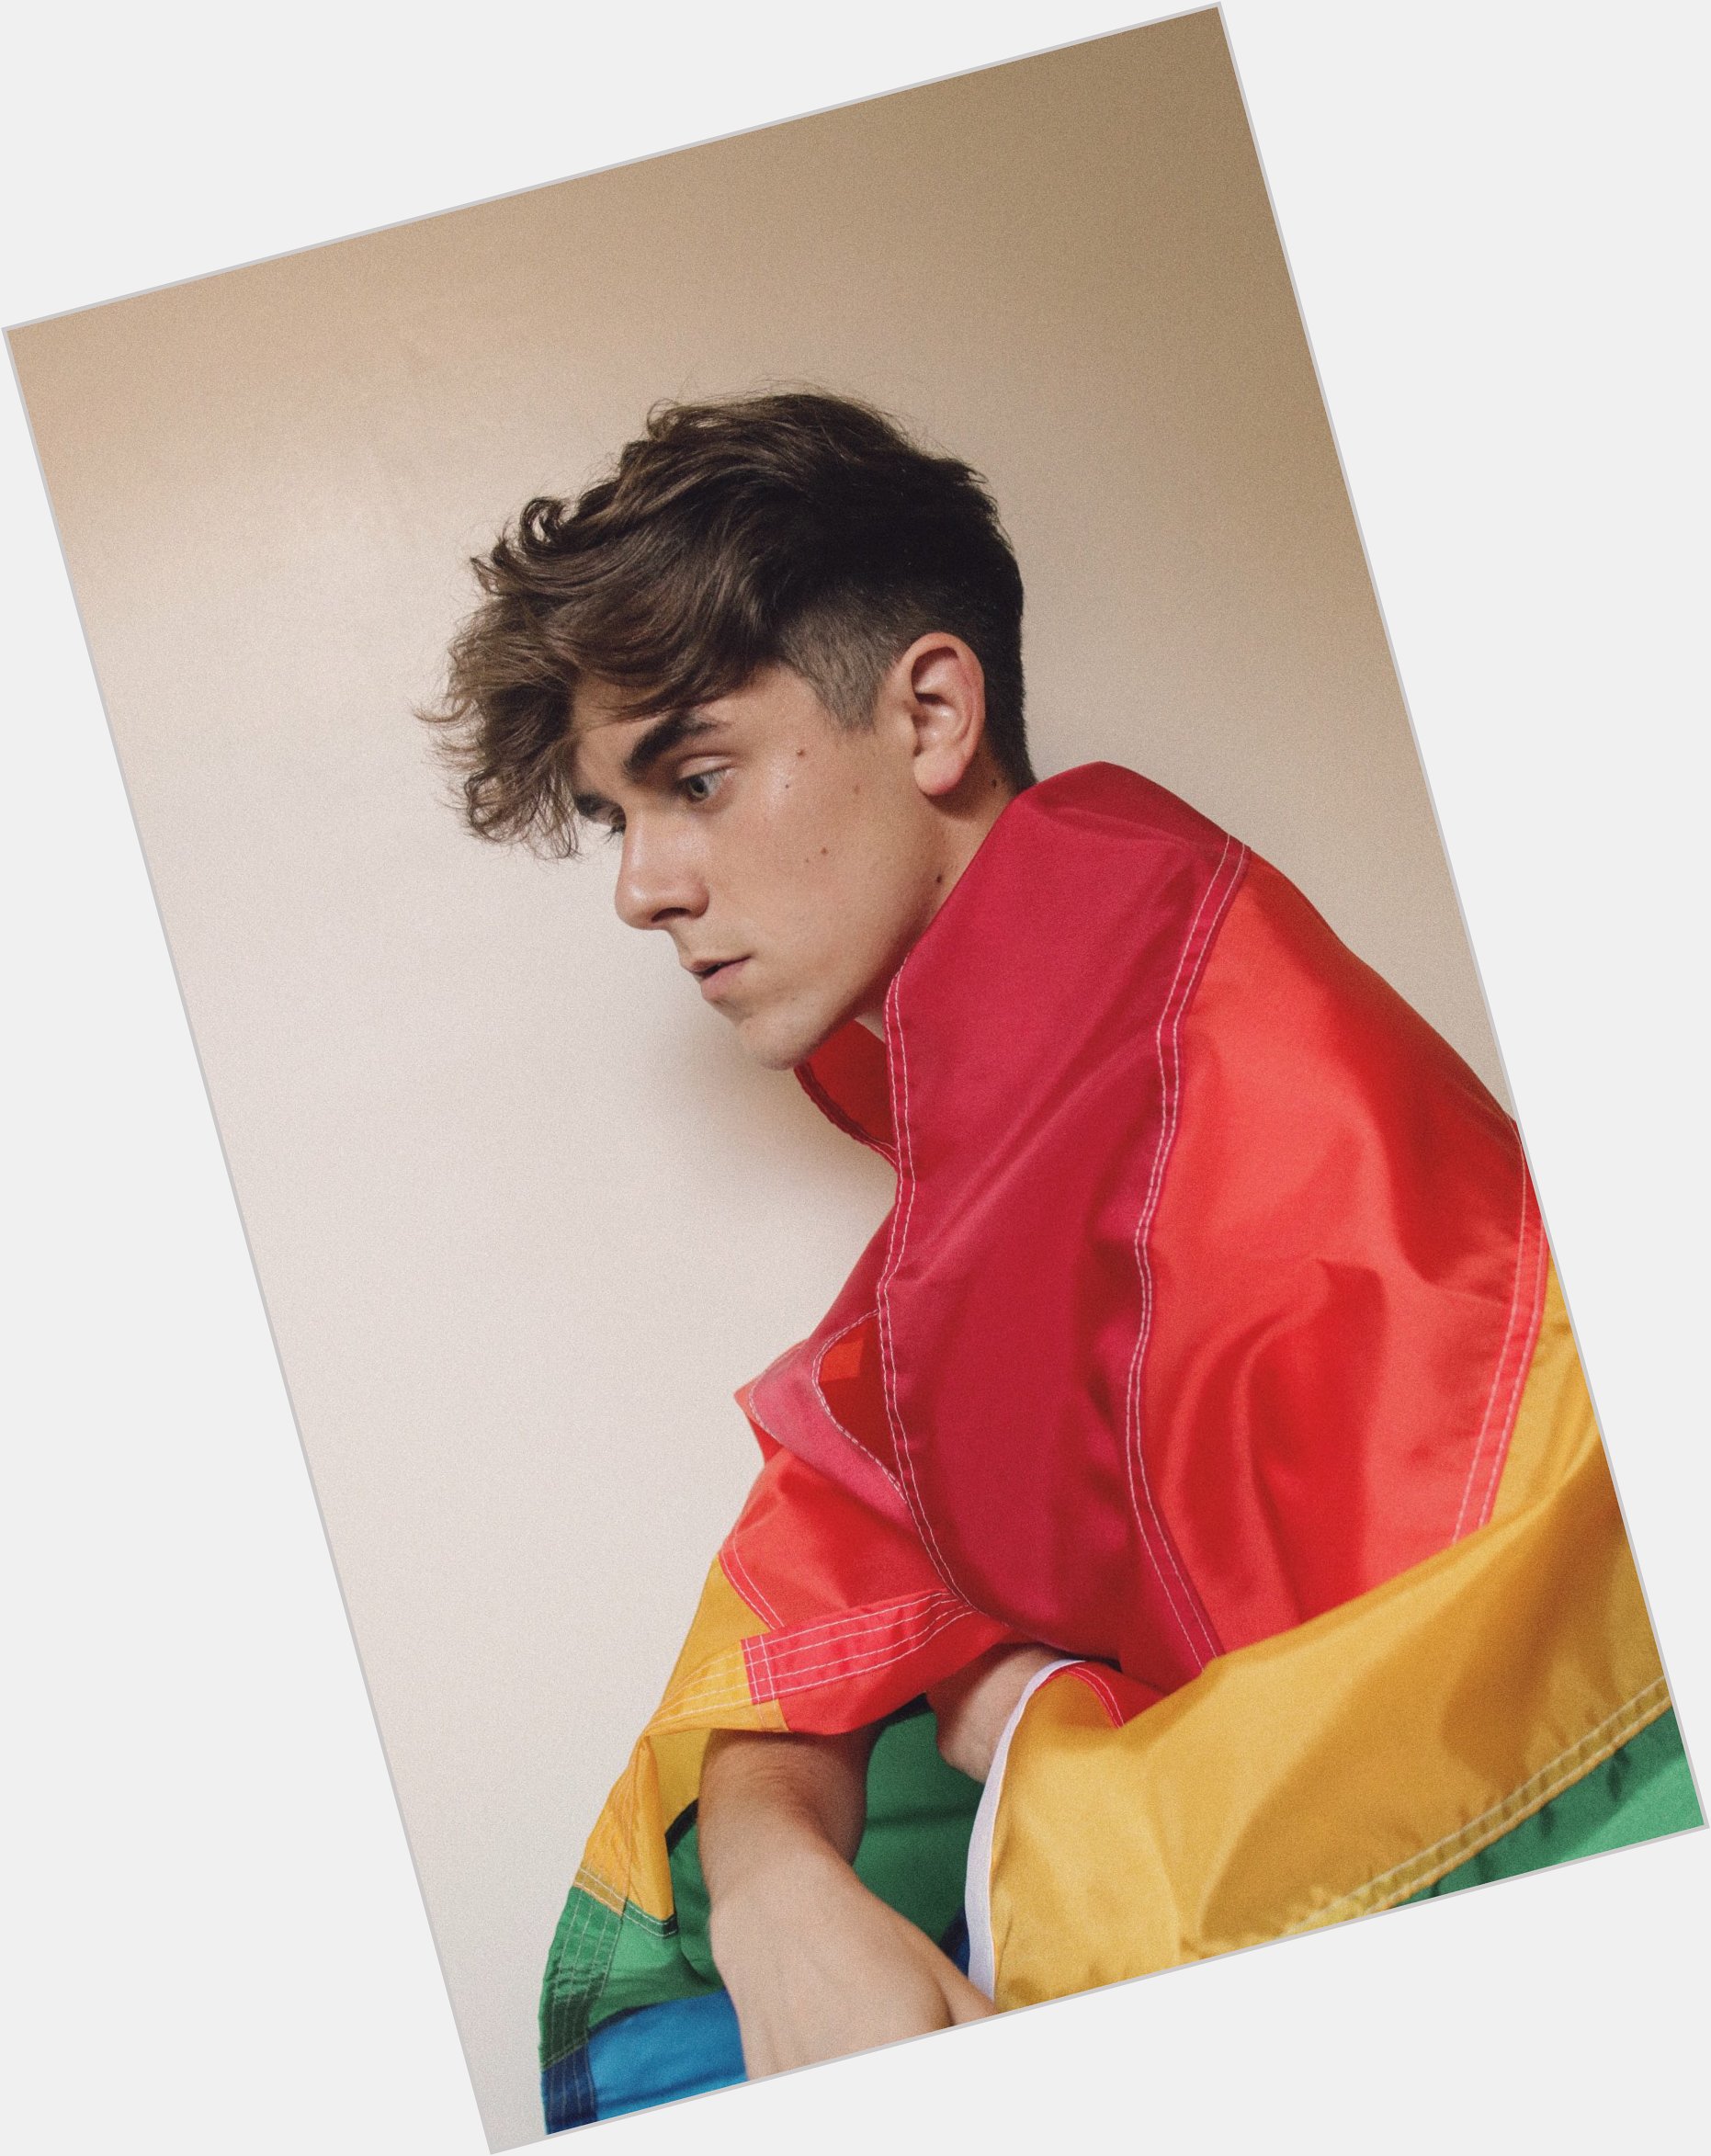 Connor Franta light brown hair & hairstyles Athletic body, 